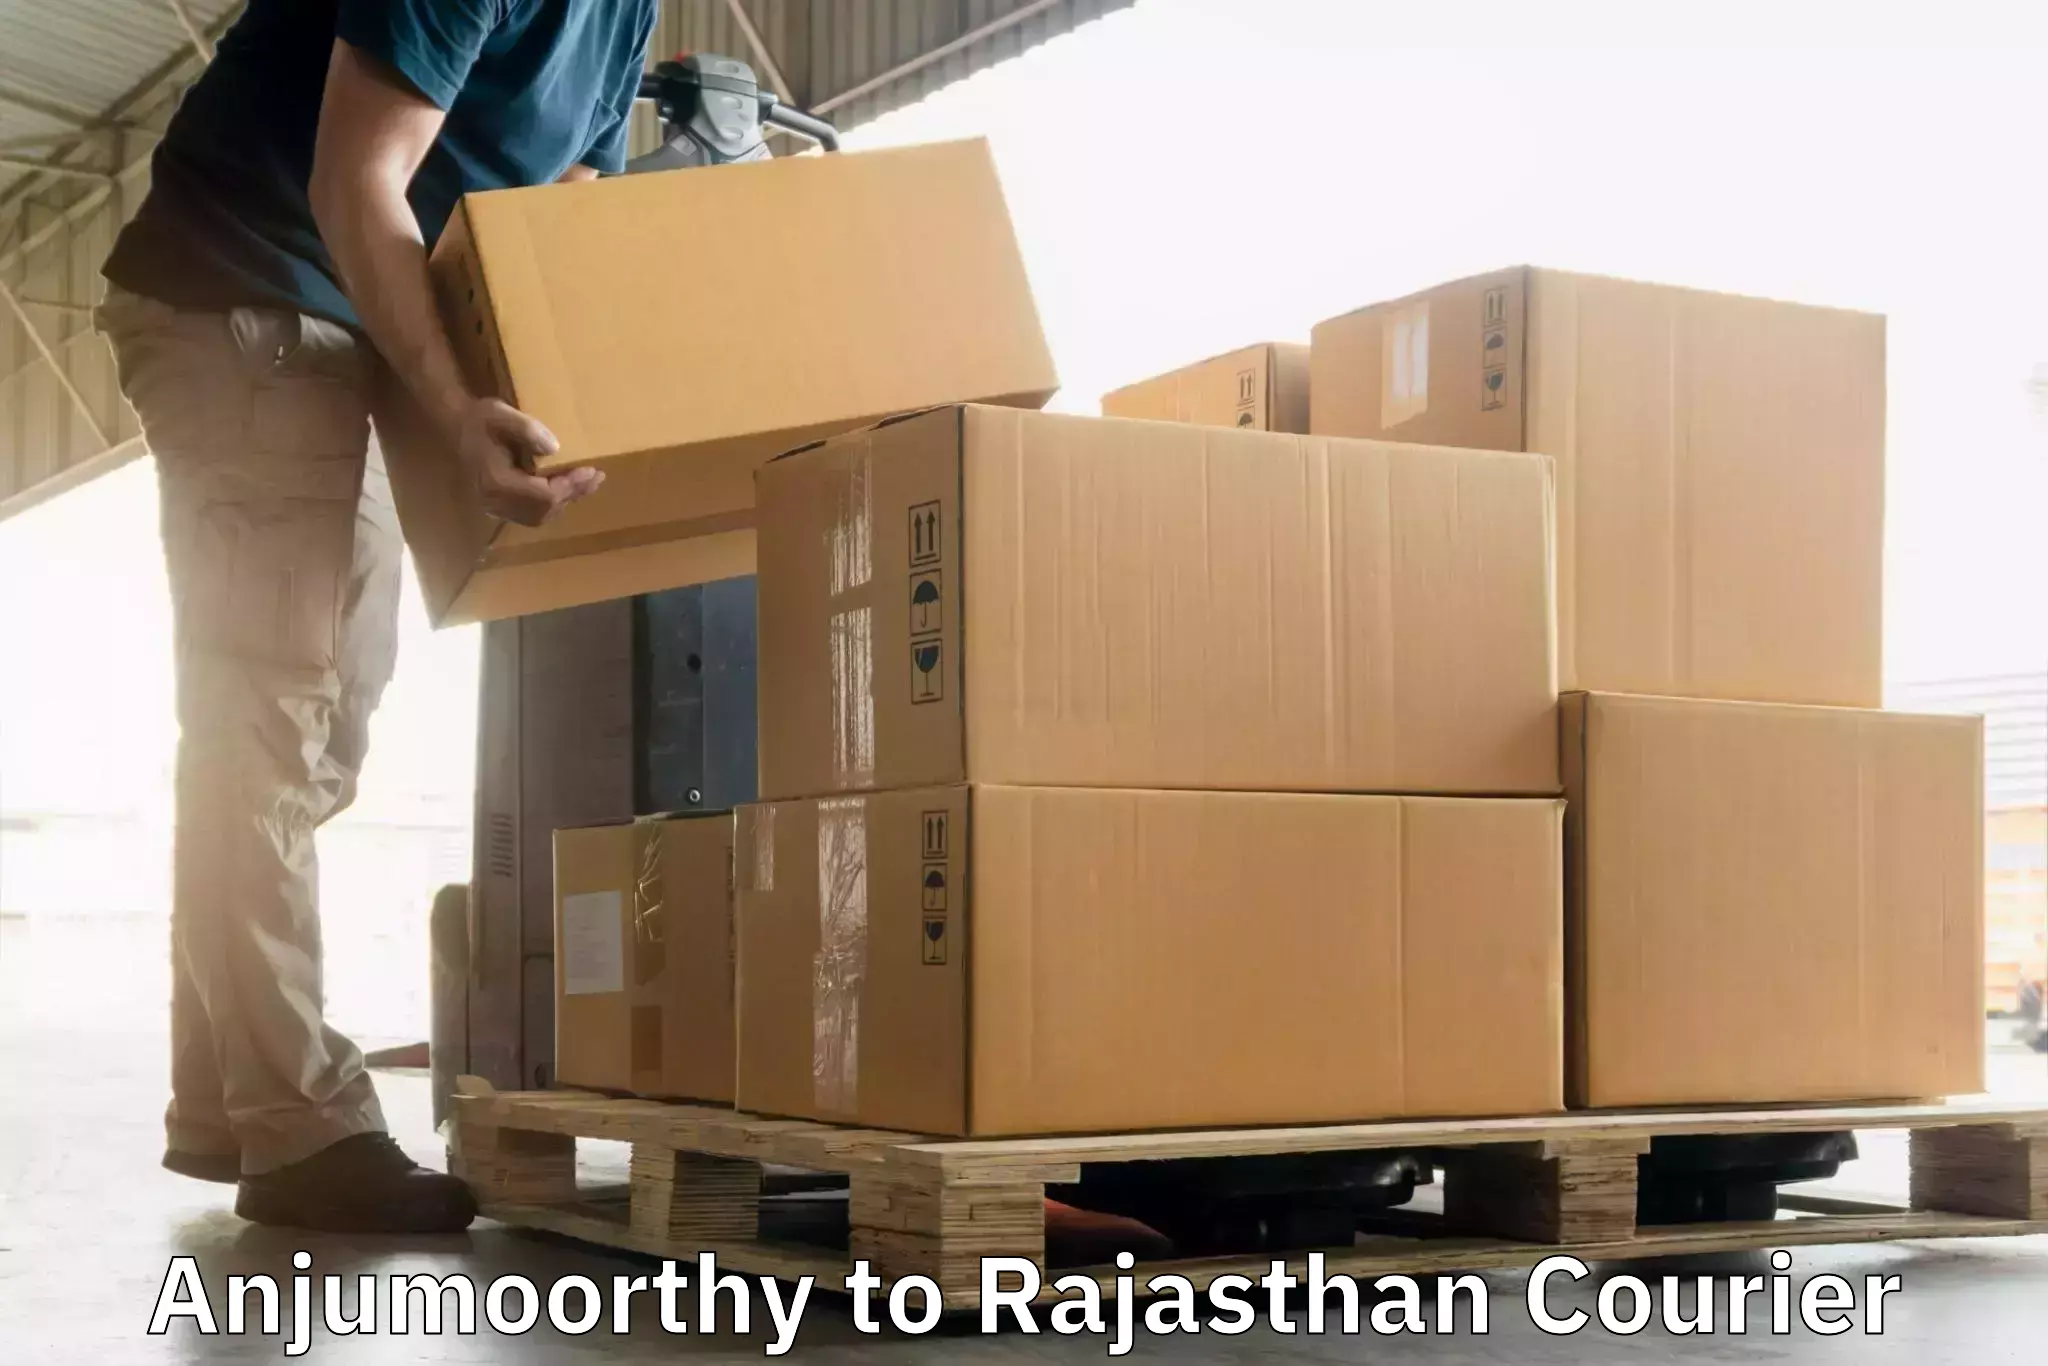 Modern courier technology in Anjumoorthy to Rajasthan